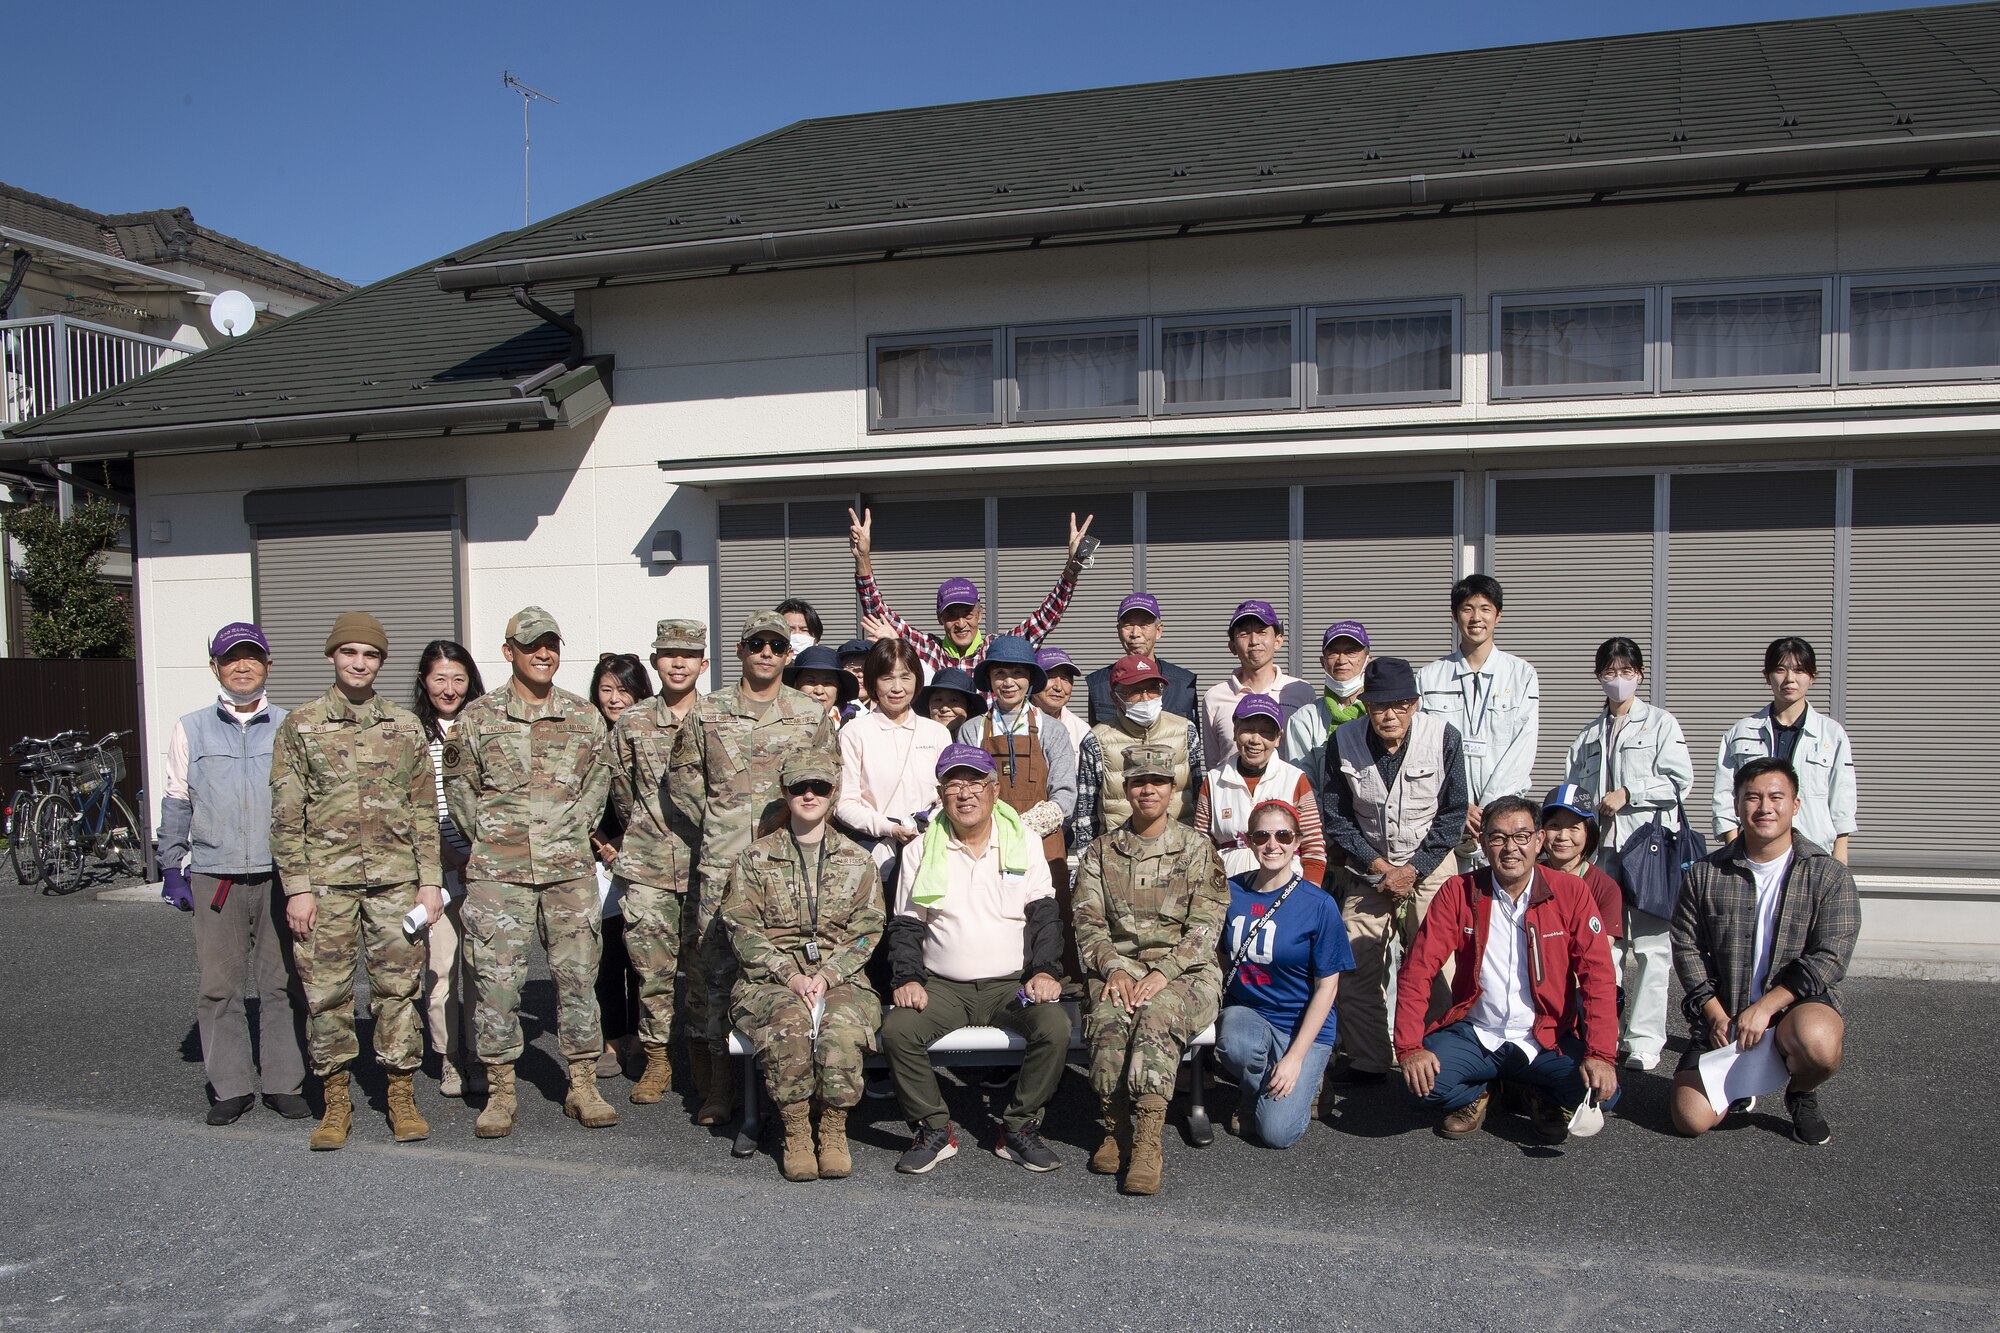 Airmen assigned to the 374th Airlift Wing gather with members of the Fussa City community during a bilateral beautification project at Fussa City, Japan, Oct. 31, 2022. The project was an opportunity for Team Yokota to strengthen its ties and friendship with Japanese neighbors outside the gates. (U.S. Air Force photo by Tech. Sgt. Christopher Hubenthal)